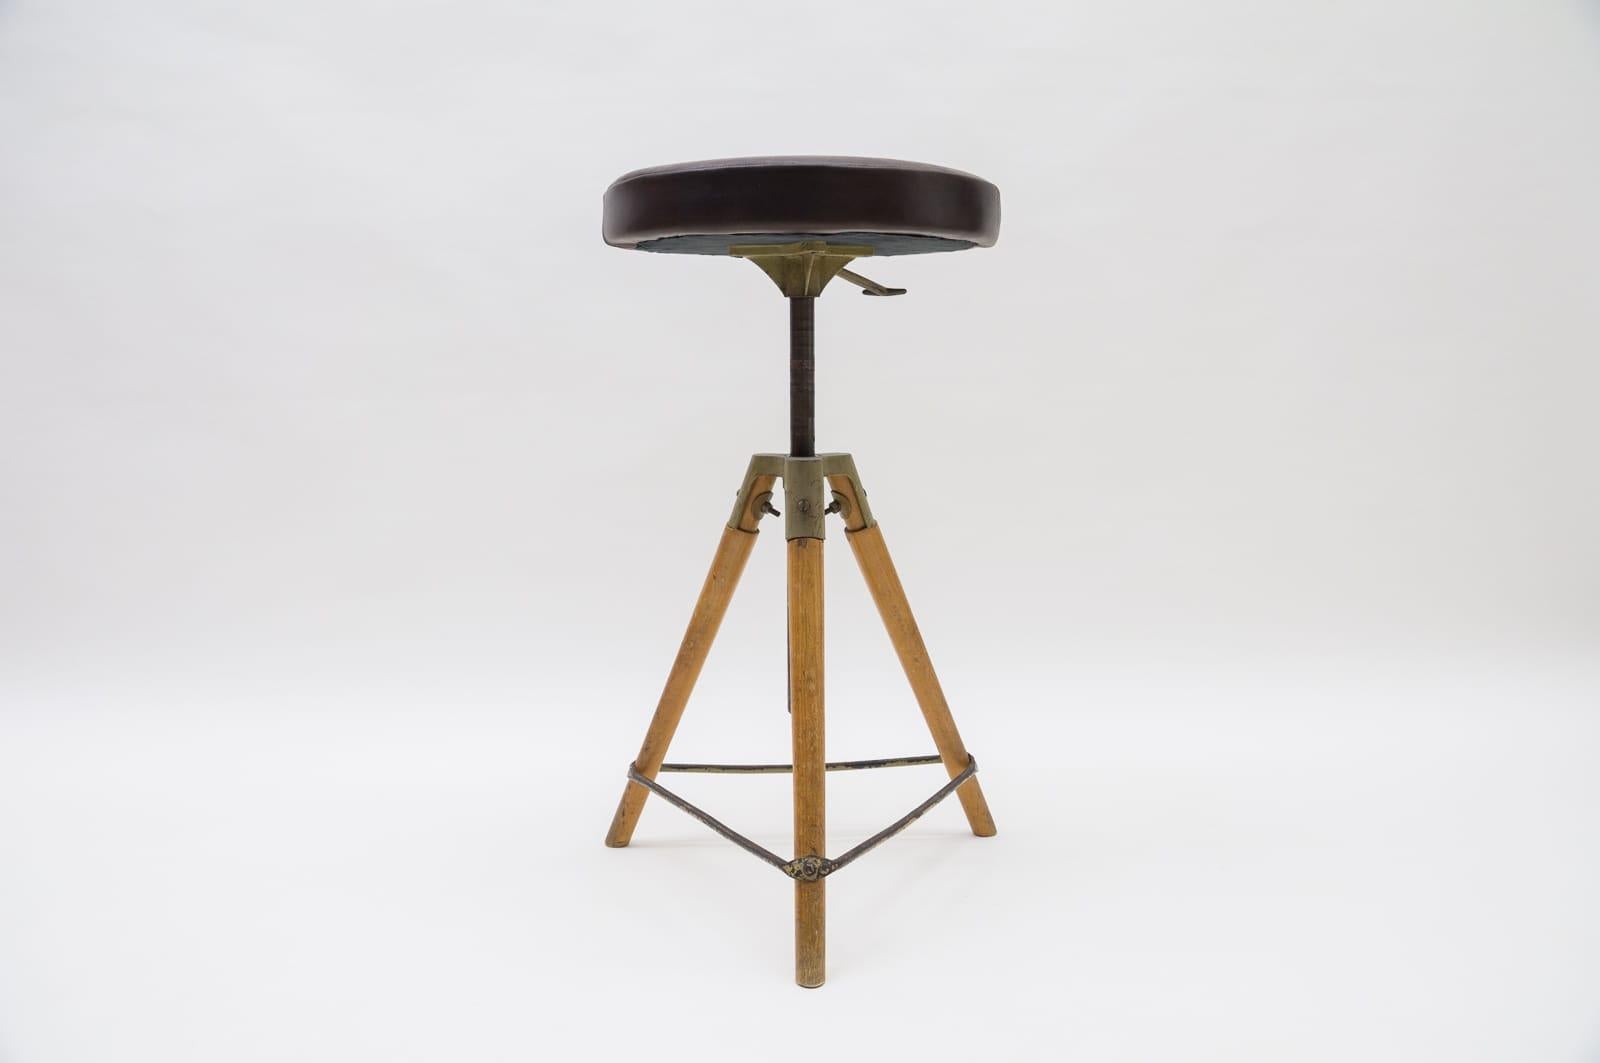 Mid-Century Modern Adjustable Swiss Stool in Leather Metal and Wood, 1940s/50s In Good Condition For Sale In Nürnberg, Bayern